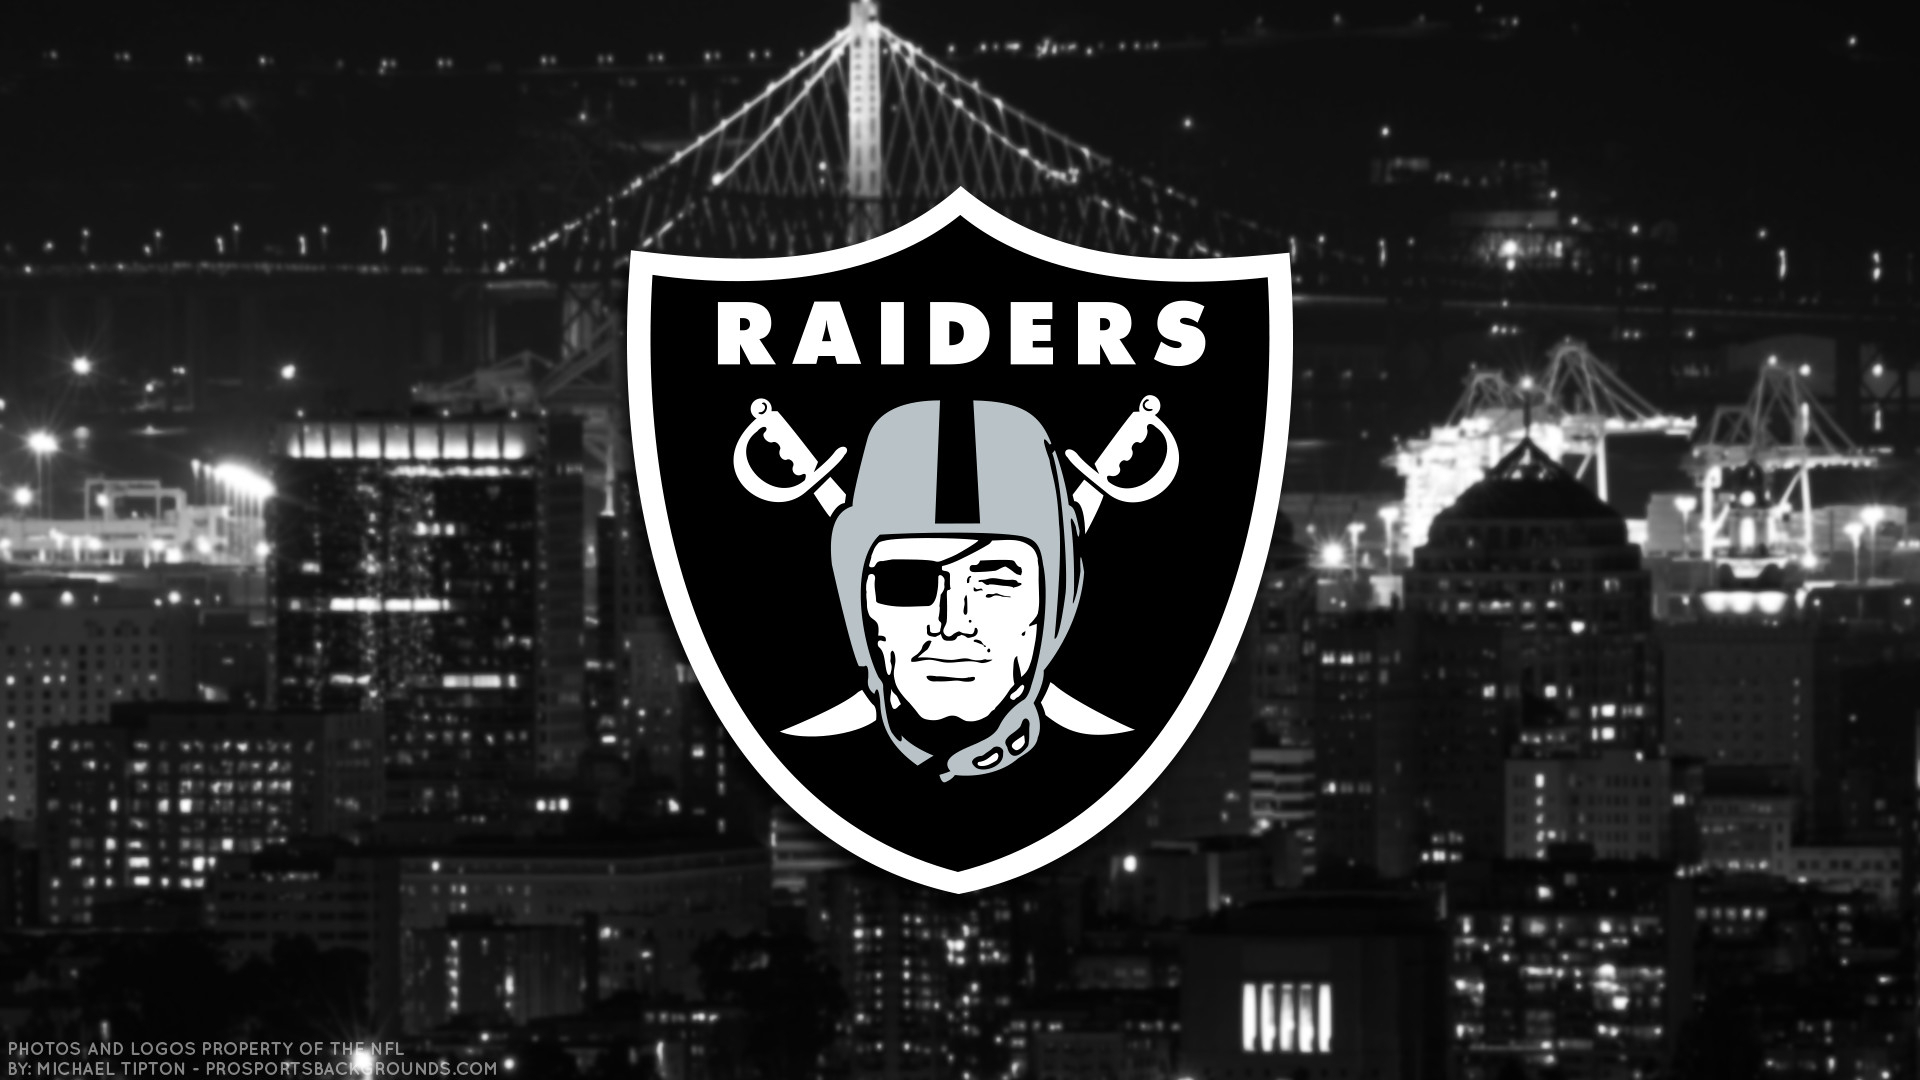 10 New Oakland Raiders Wallpaper Hd FULL HD 1920×1080 For PC Background